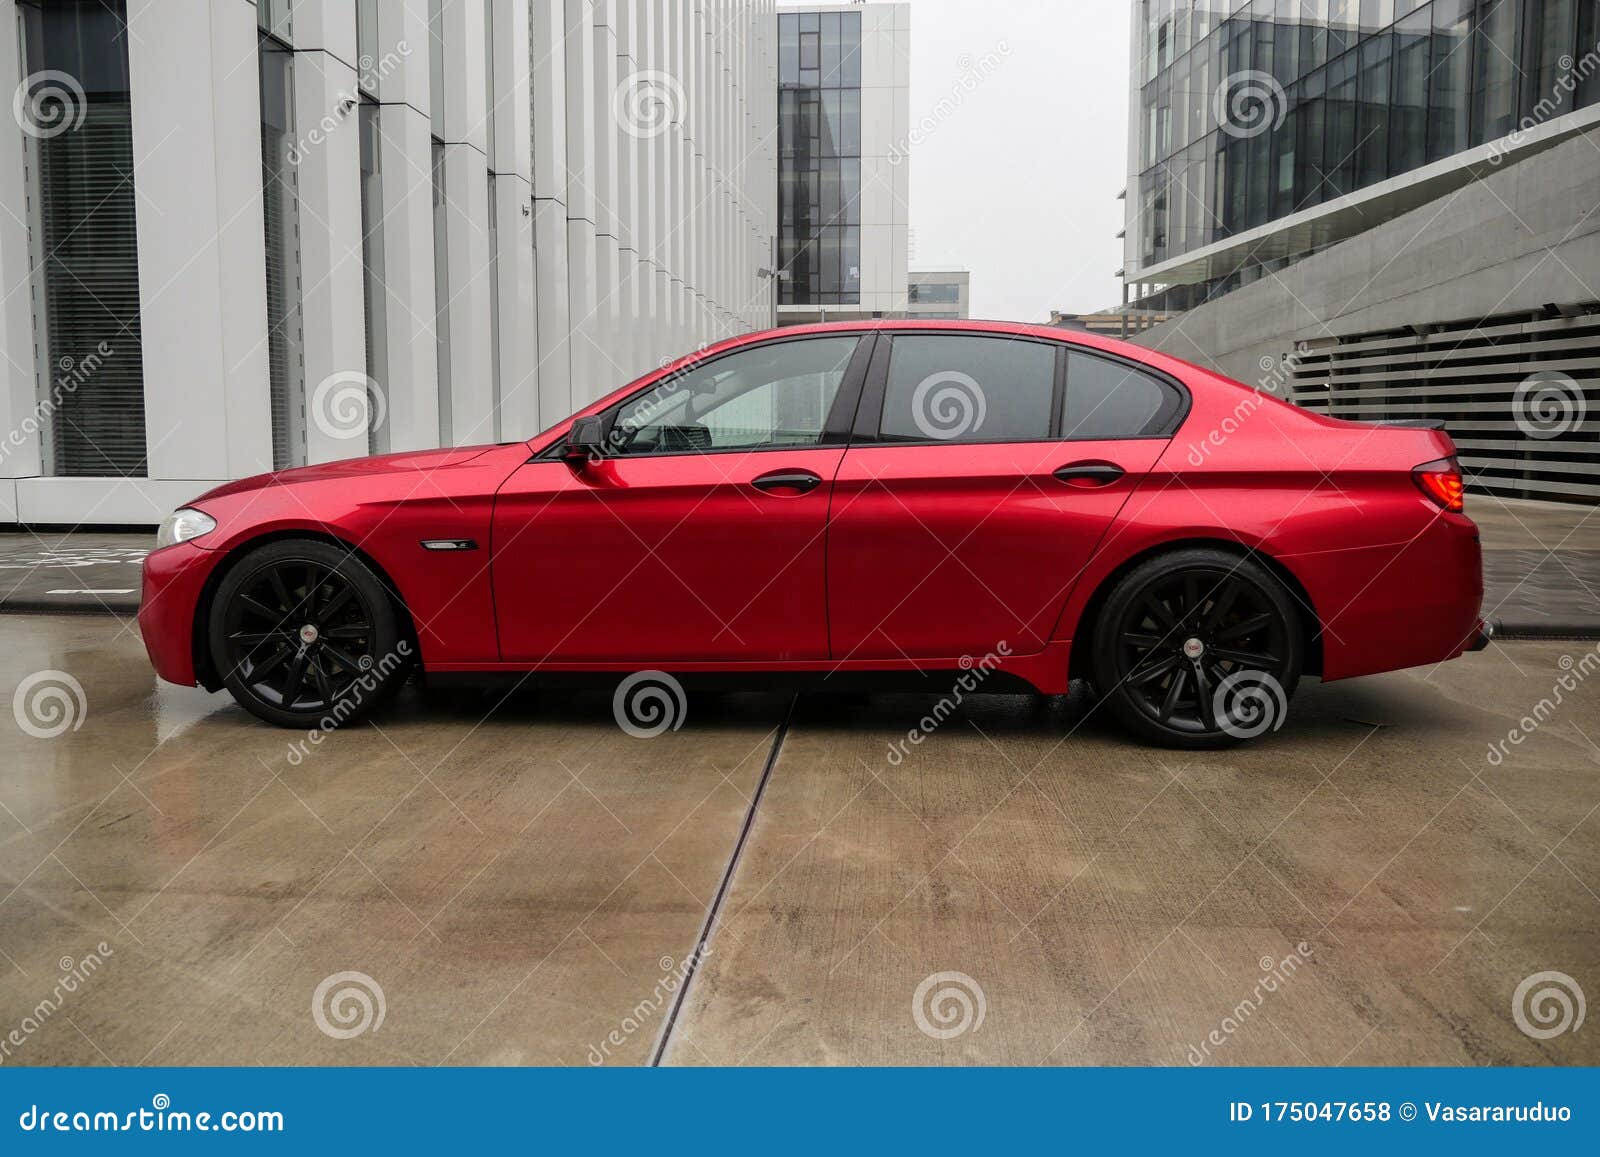 Bmw 5 Series F10 Car Is Parked Near Office Building Editorial Stock Photo -  Image Of Buildings, Nature: 175047658